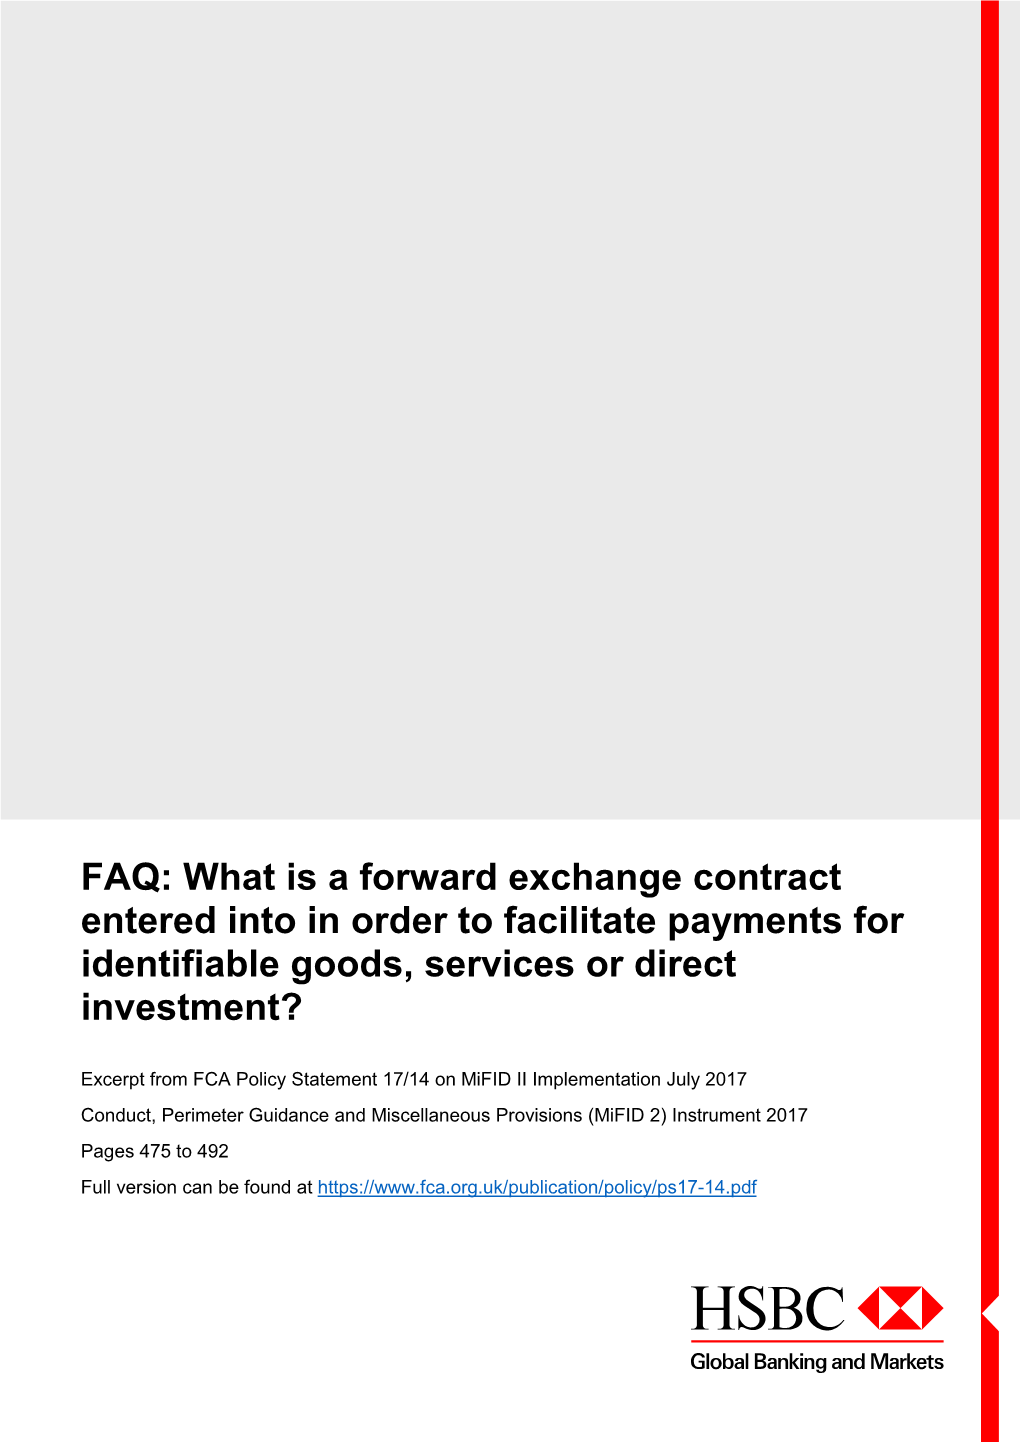 What Is a Forward Exchange Contract Entered Into in Order to Facilitate Payments for Identifiable Goods, Services Or Direct Investment?